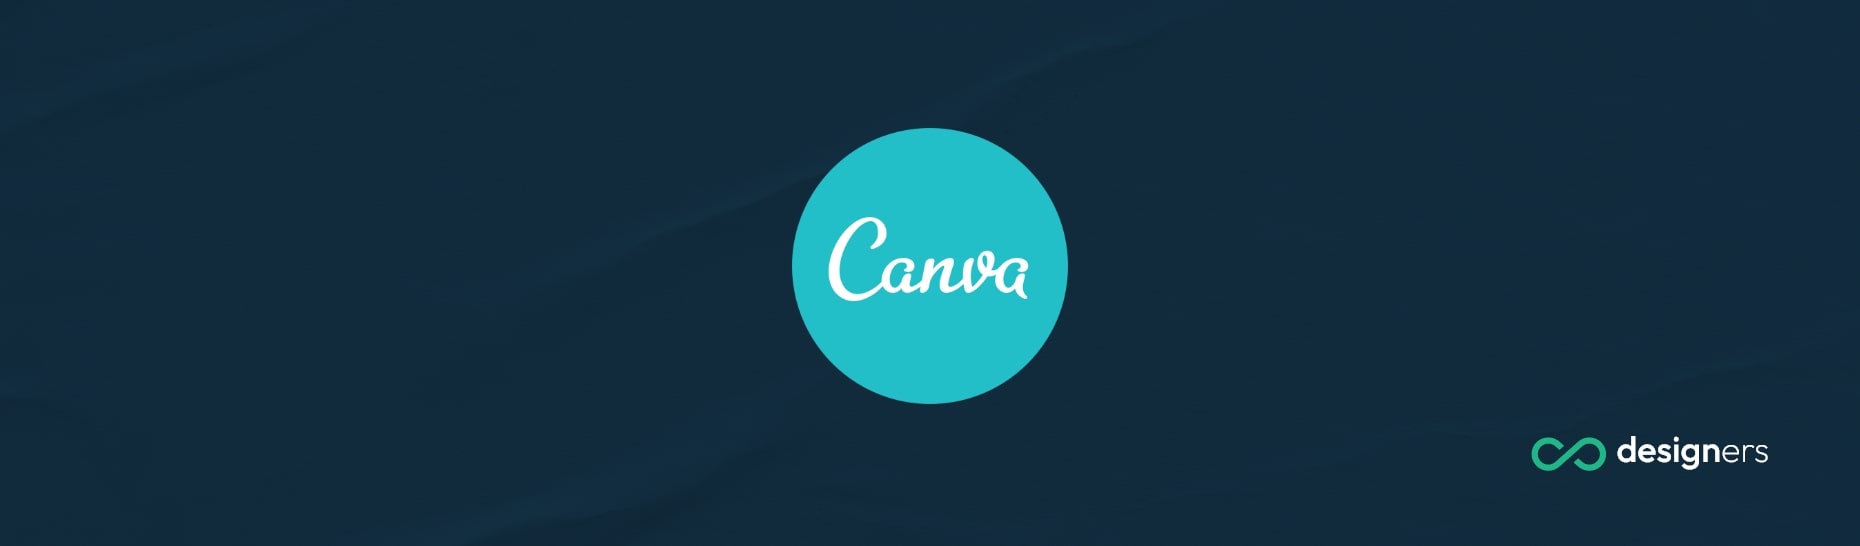 Is Canva User Friendly?